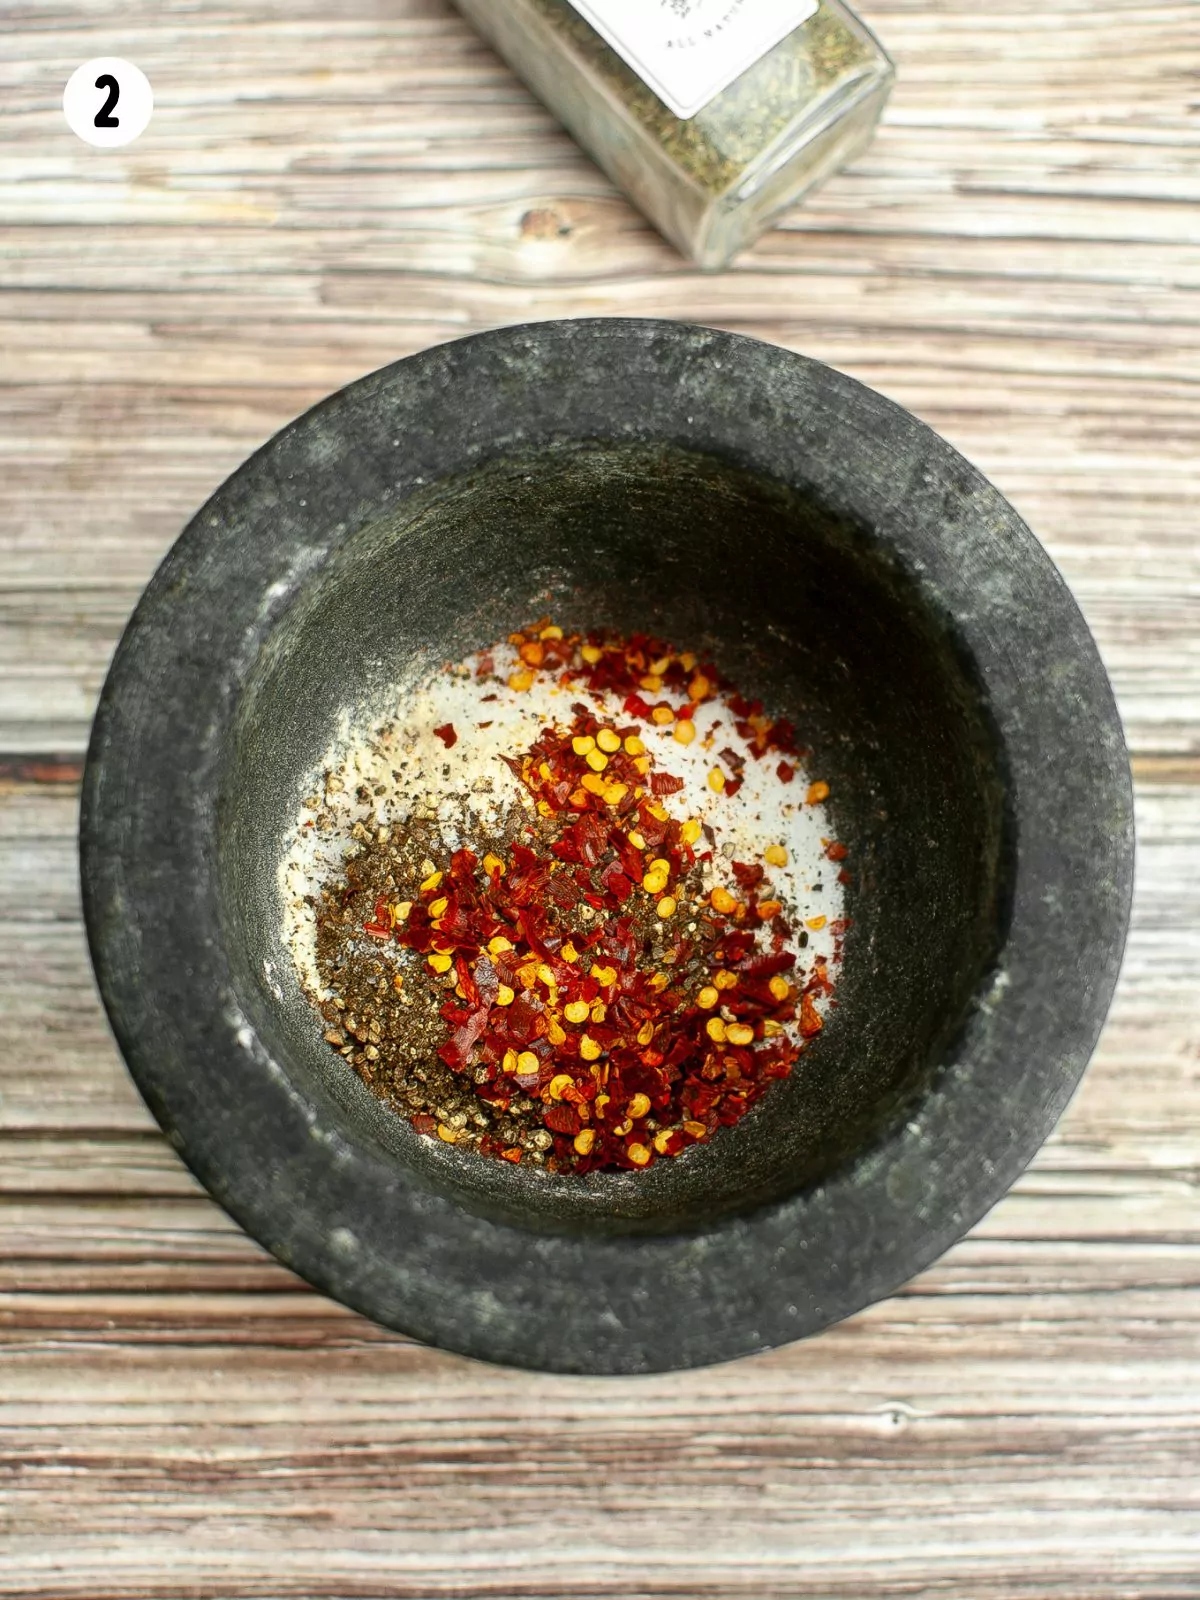 red pepper flakes with herbs in bowl.